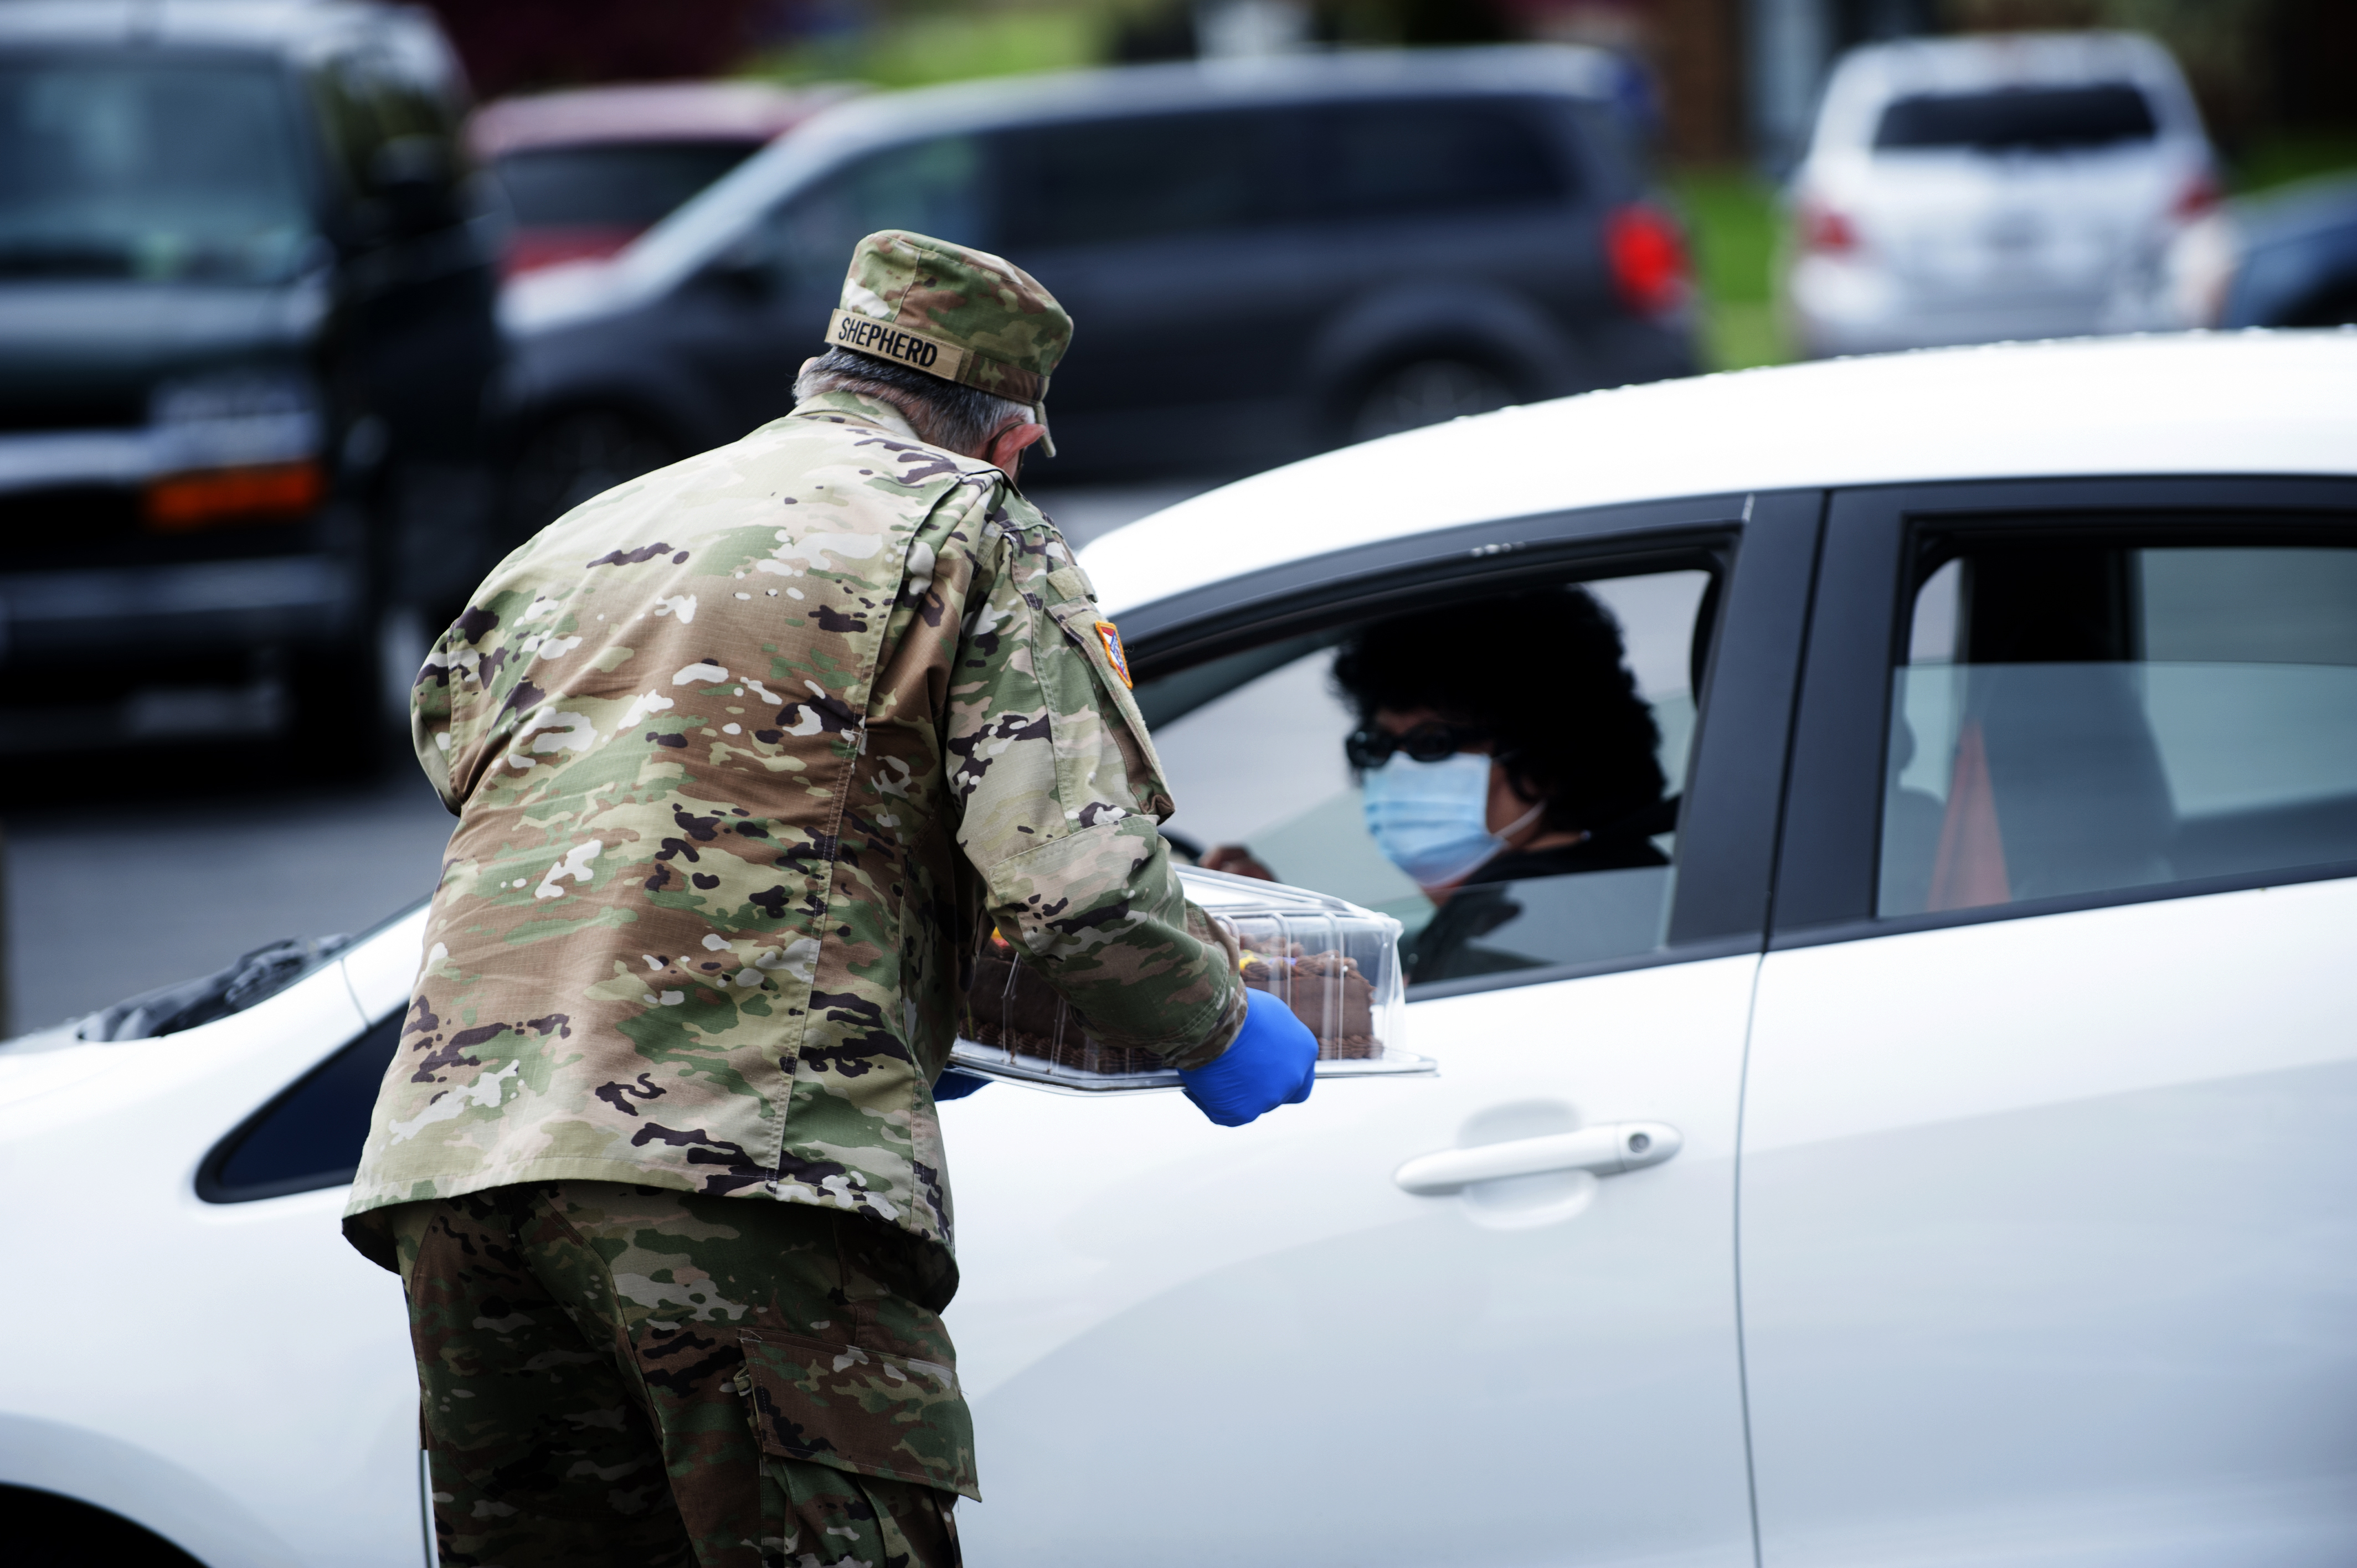 Soldier hands food to lady in car.